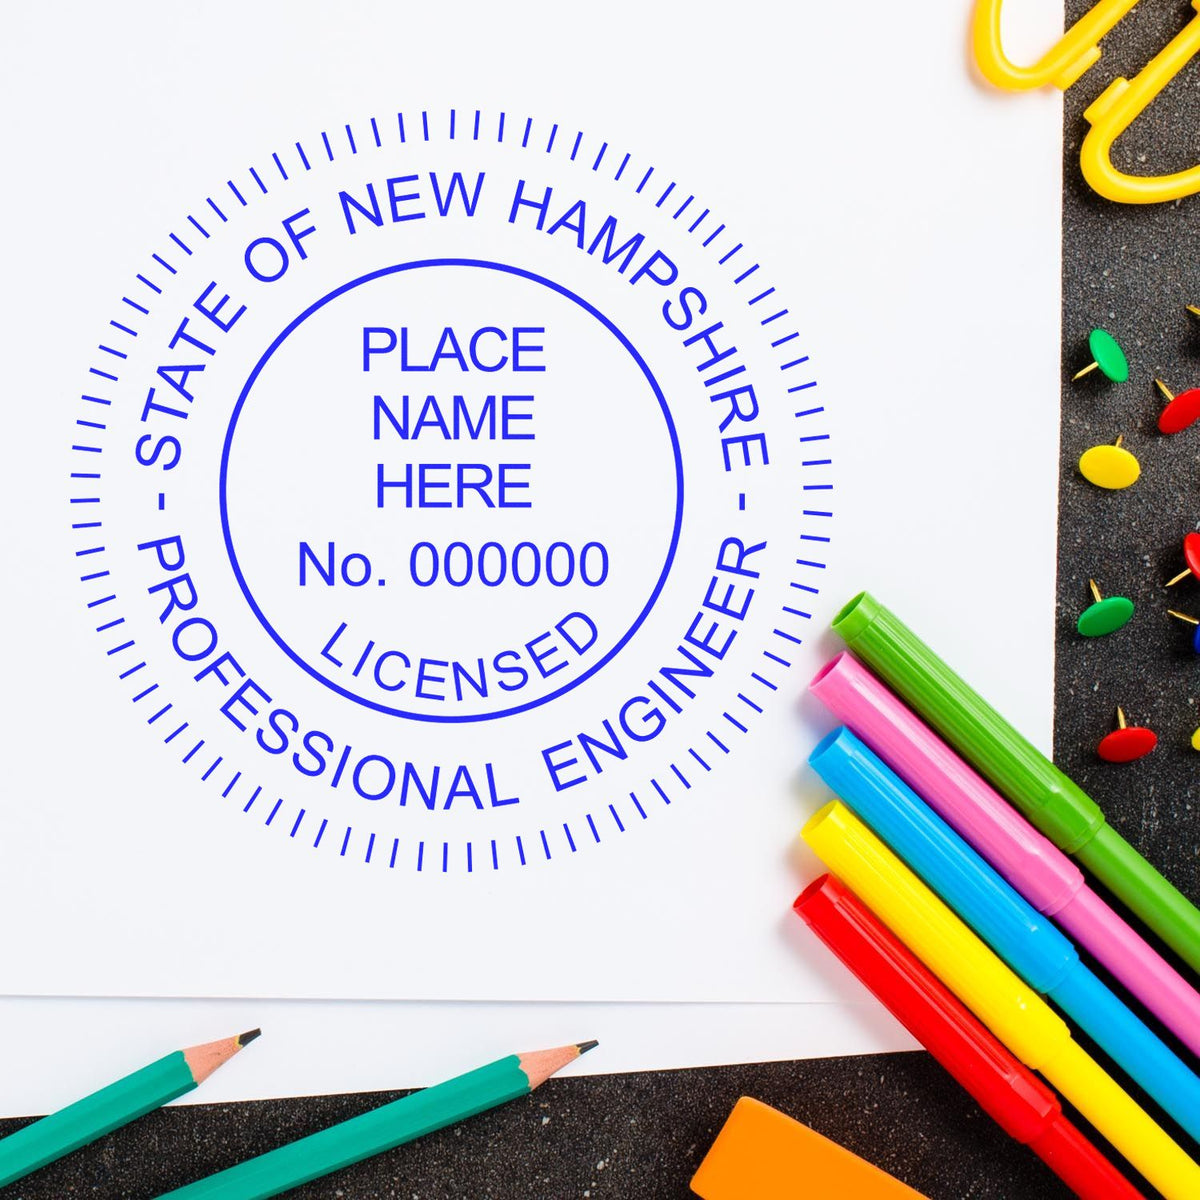 An alternative view of the New Hampshire Professional Engineer Seal Stamp stamped on a sheet of paper showing the image in use